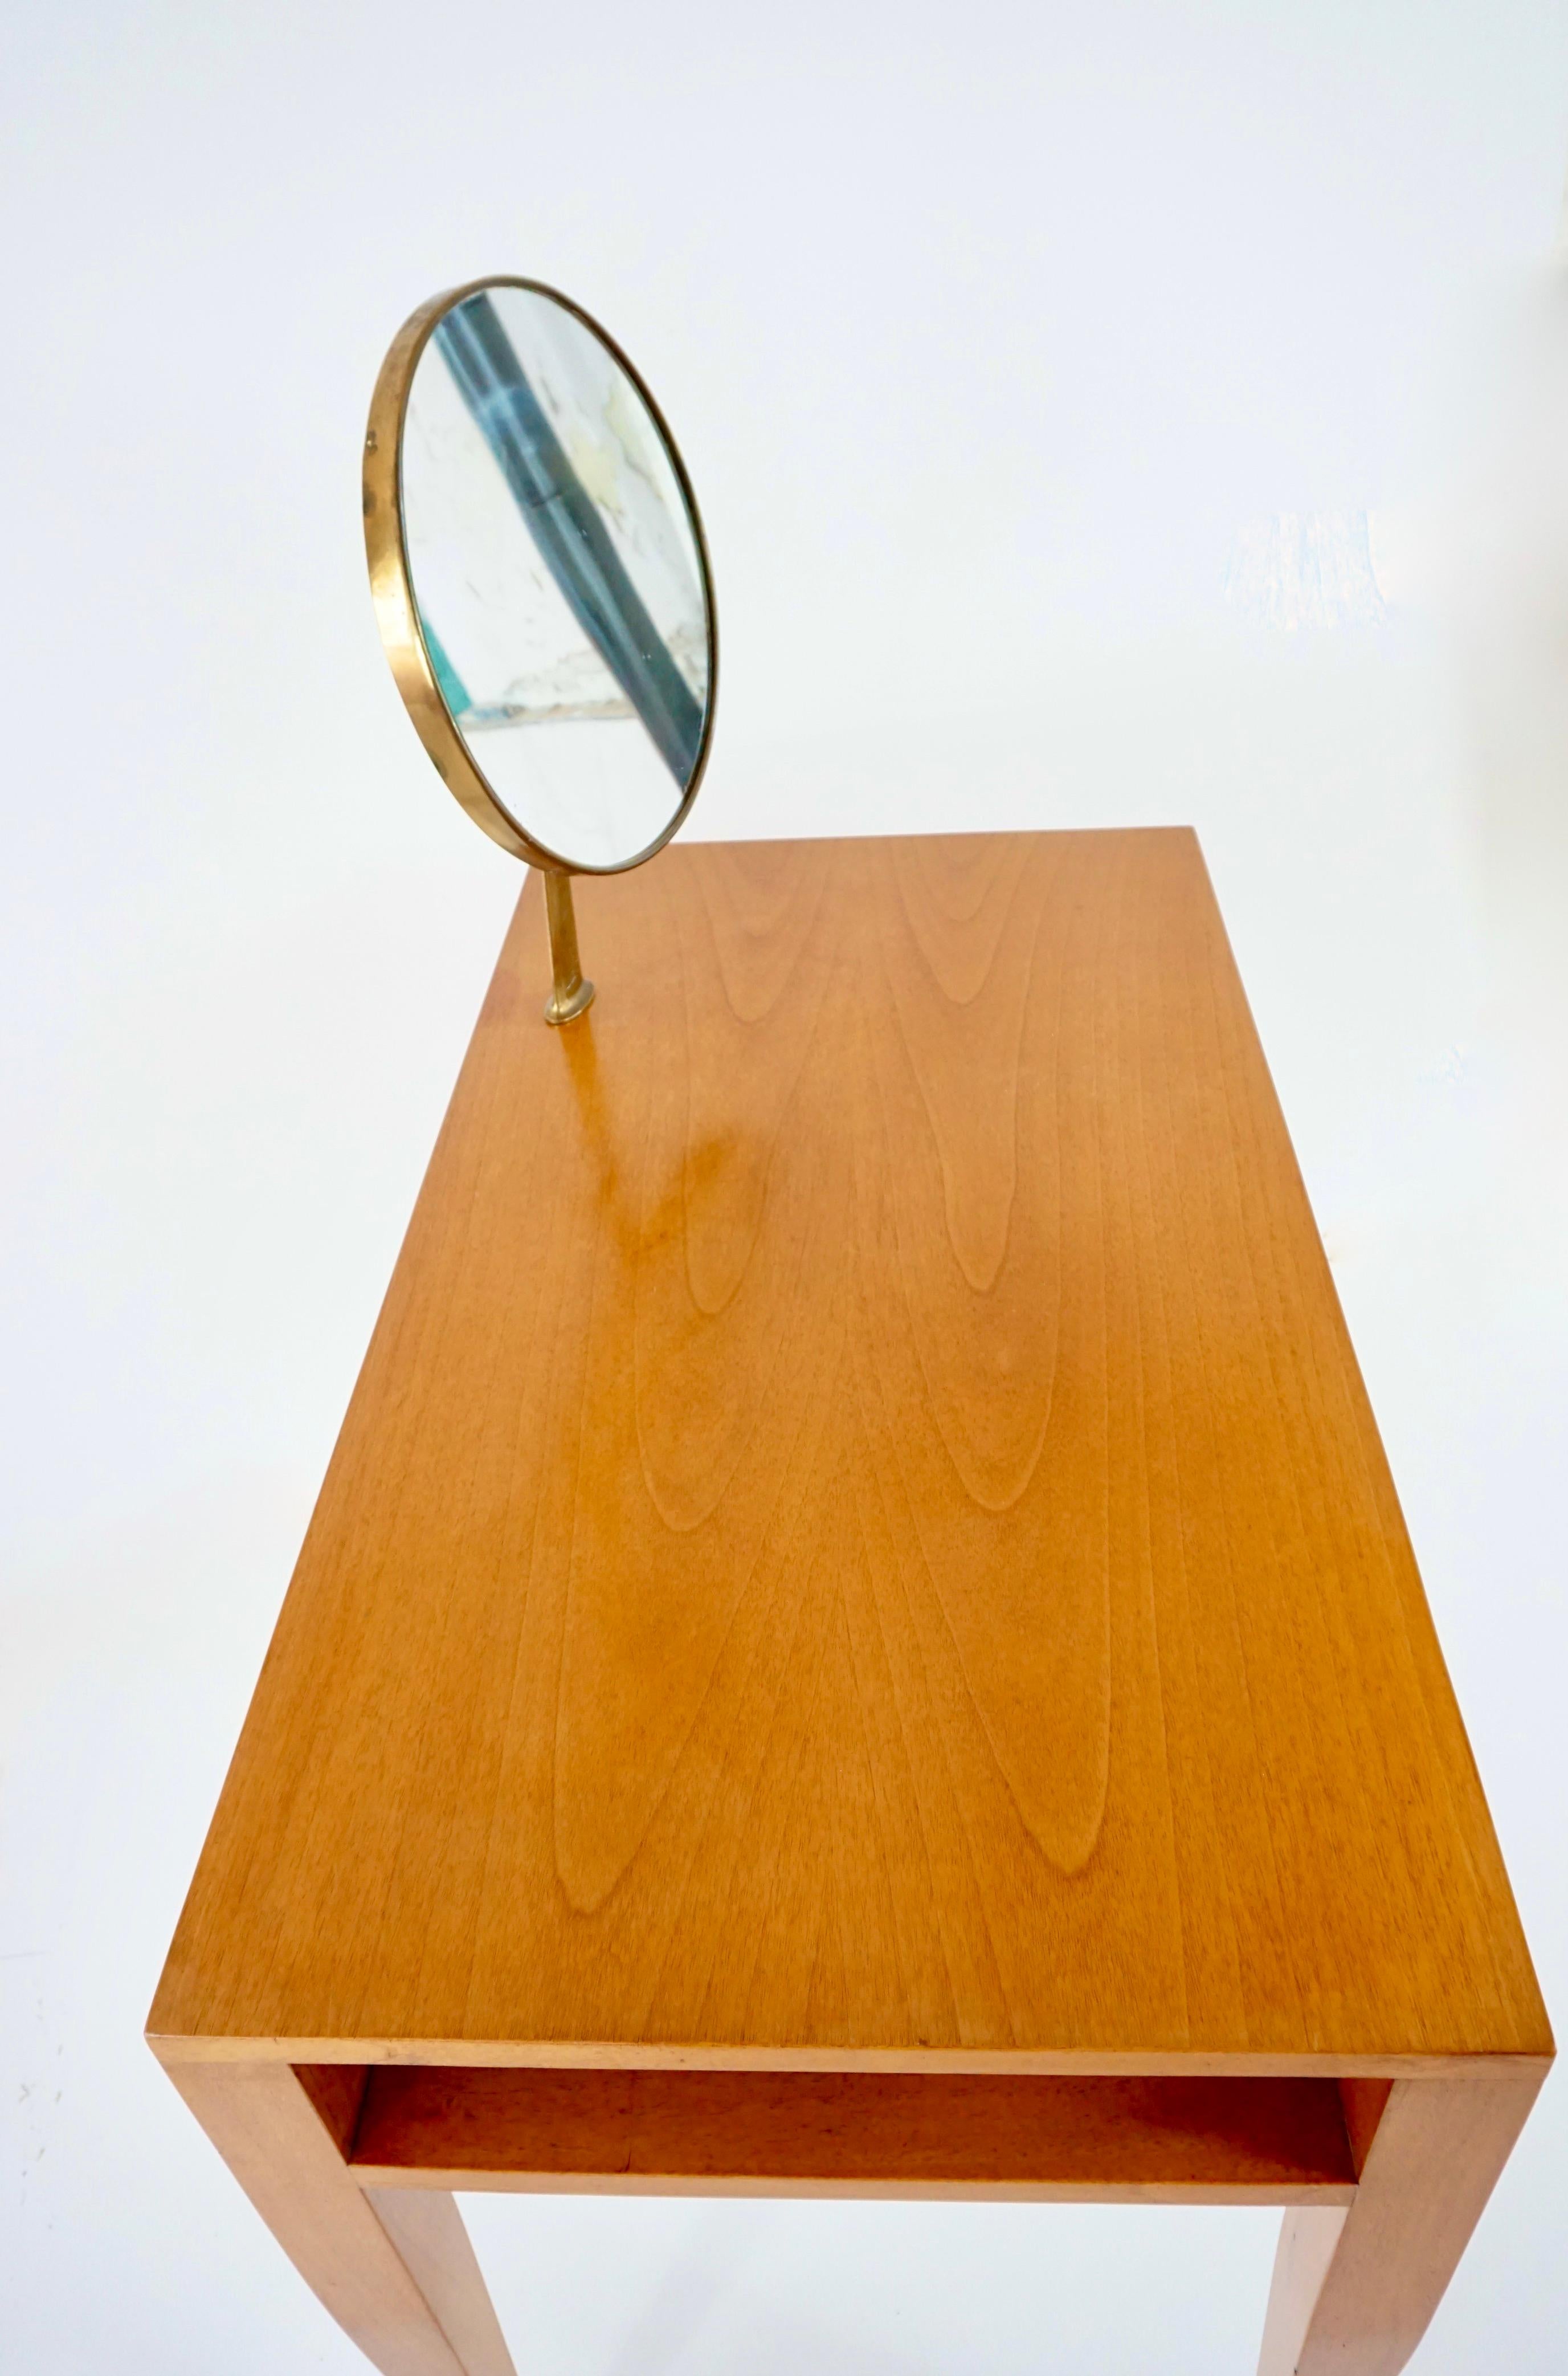 Brass Gio Ponti vanity desk console table with a adjustable Fontana arte mirror, 1950 For Sale